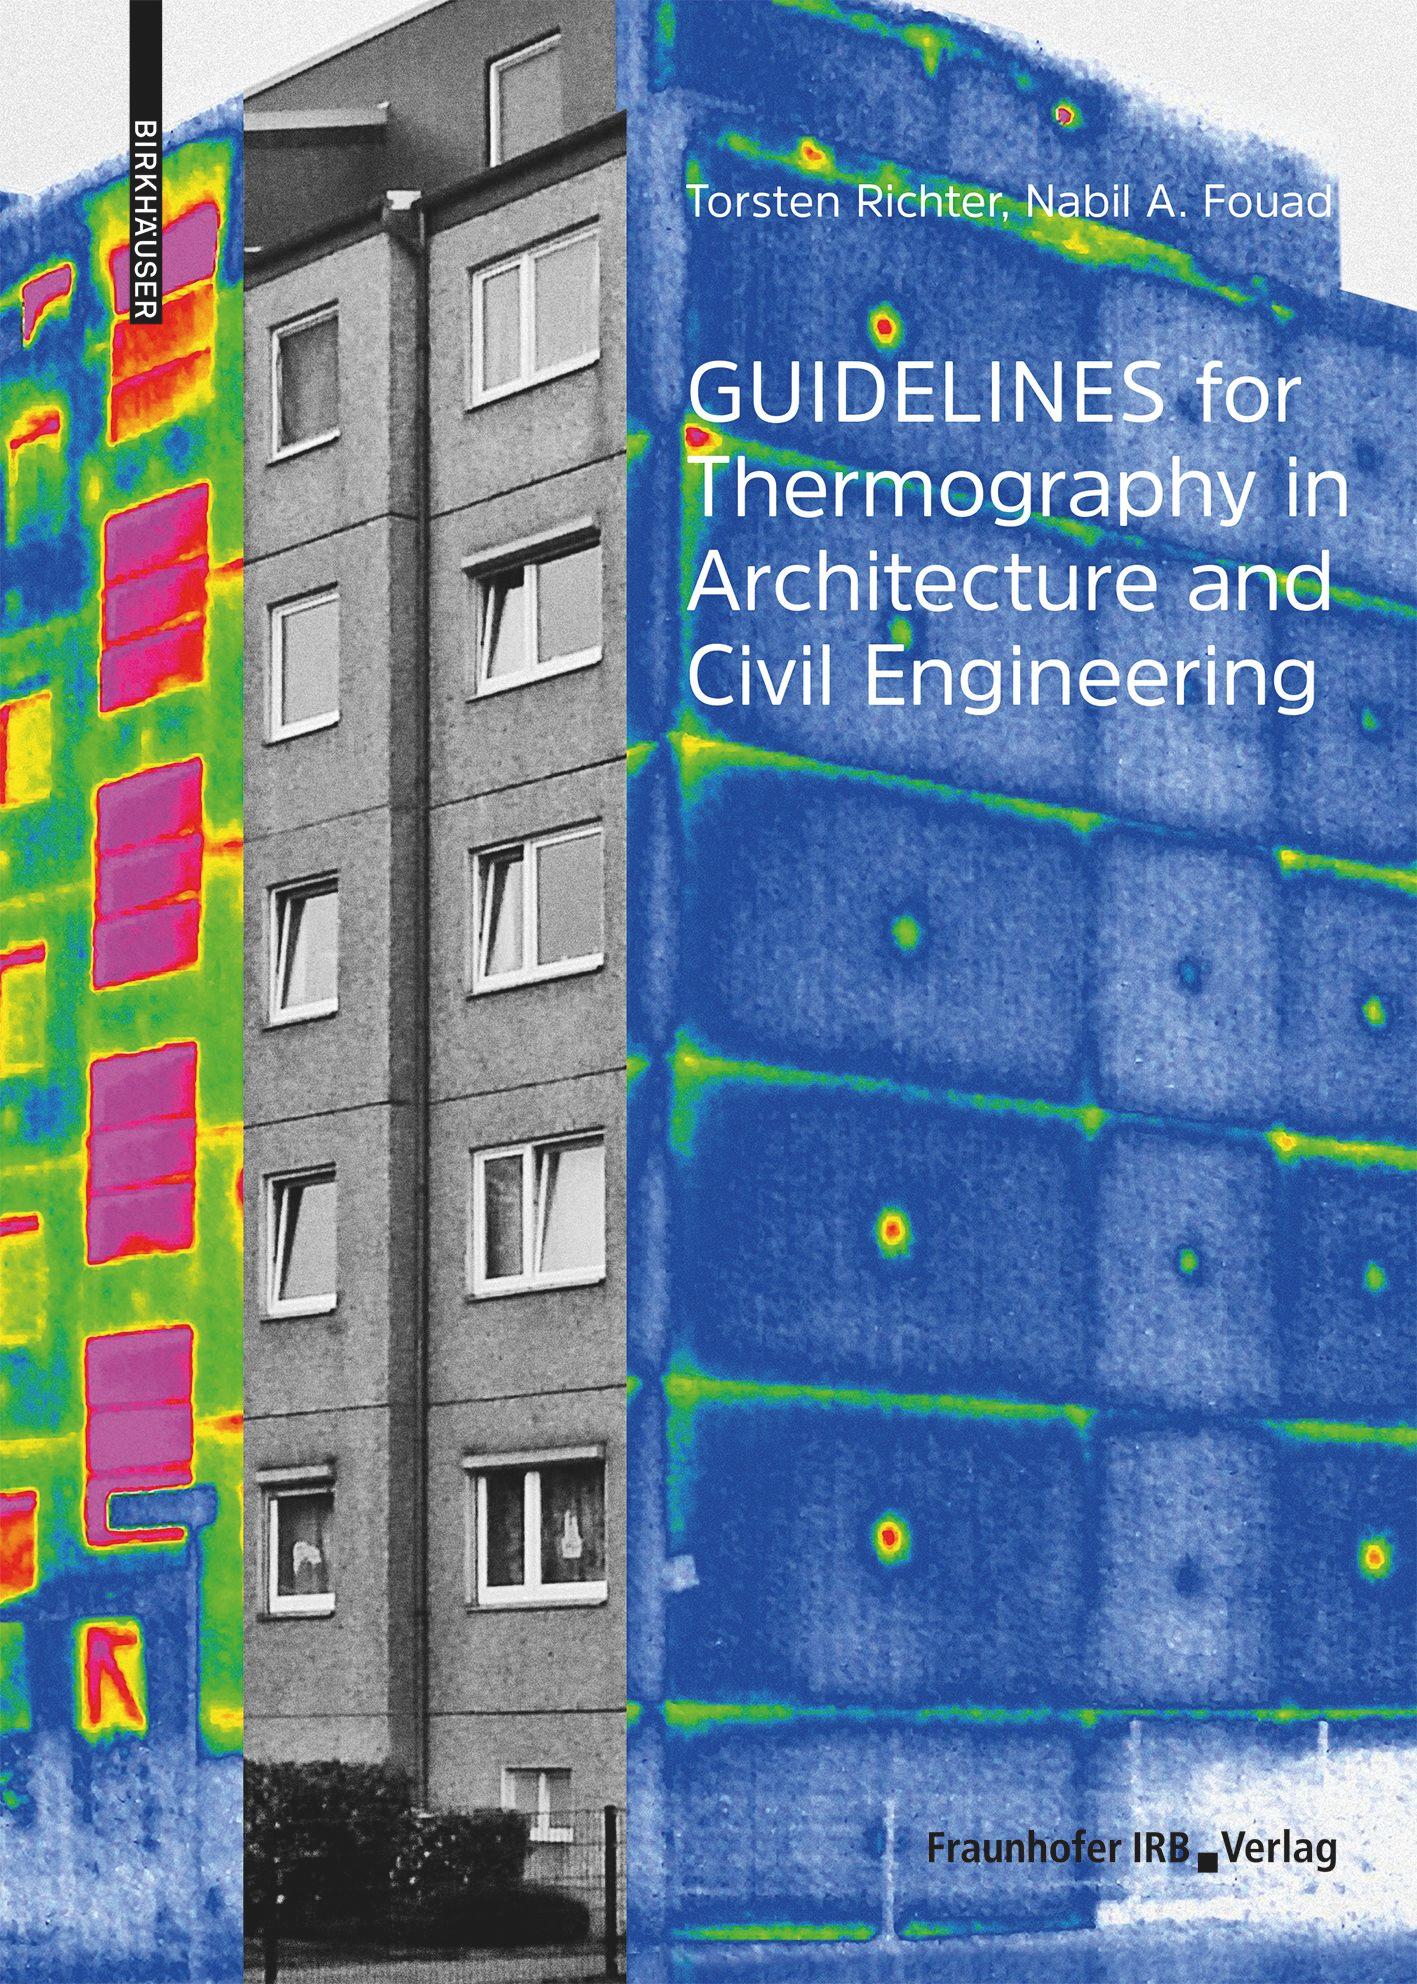 Guidelines for Thermography in Architecture and Civil Engineering's cover